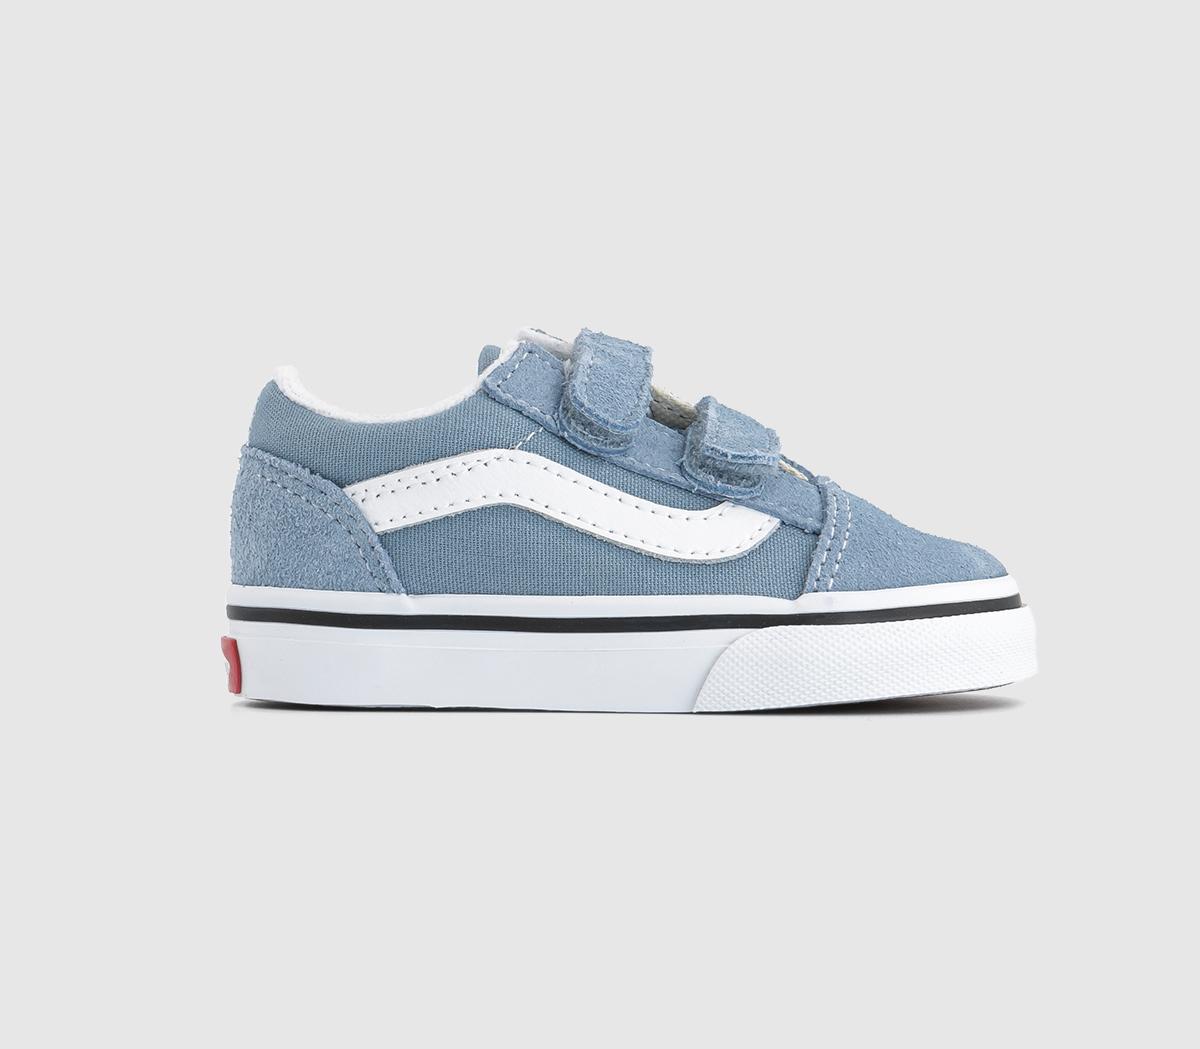 VansOld Skool Toddler TrainersColor Theory Dusty Blue